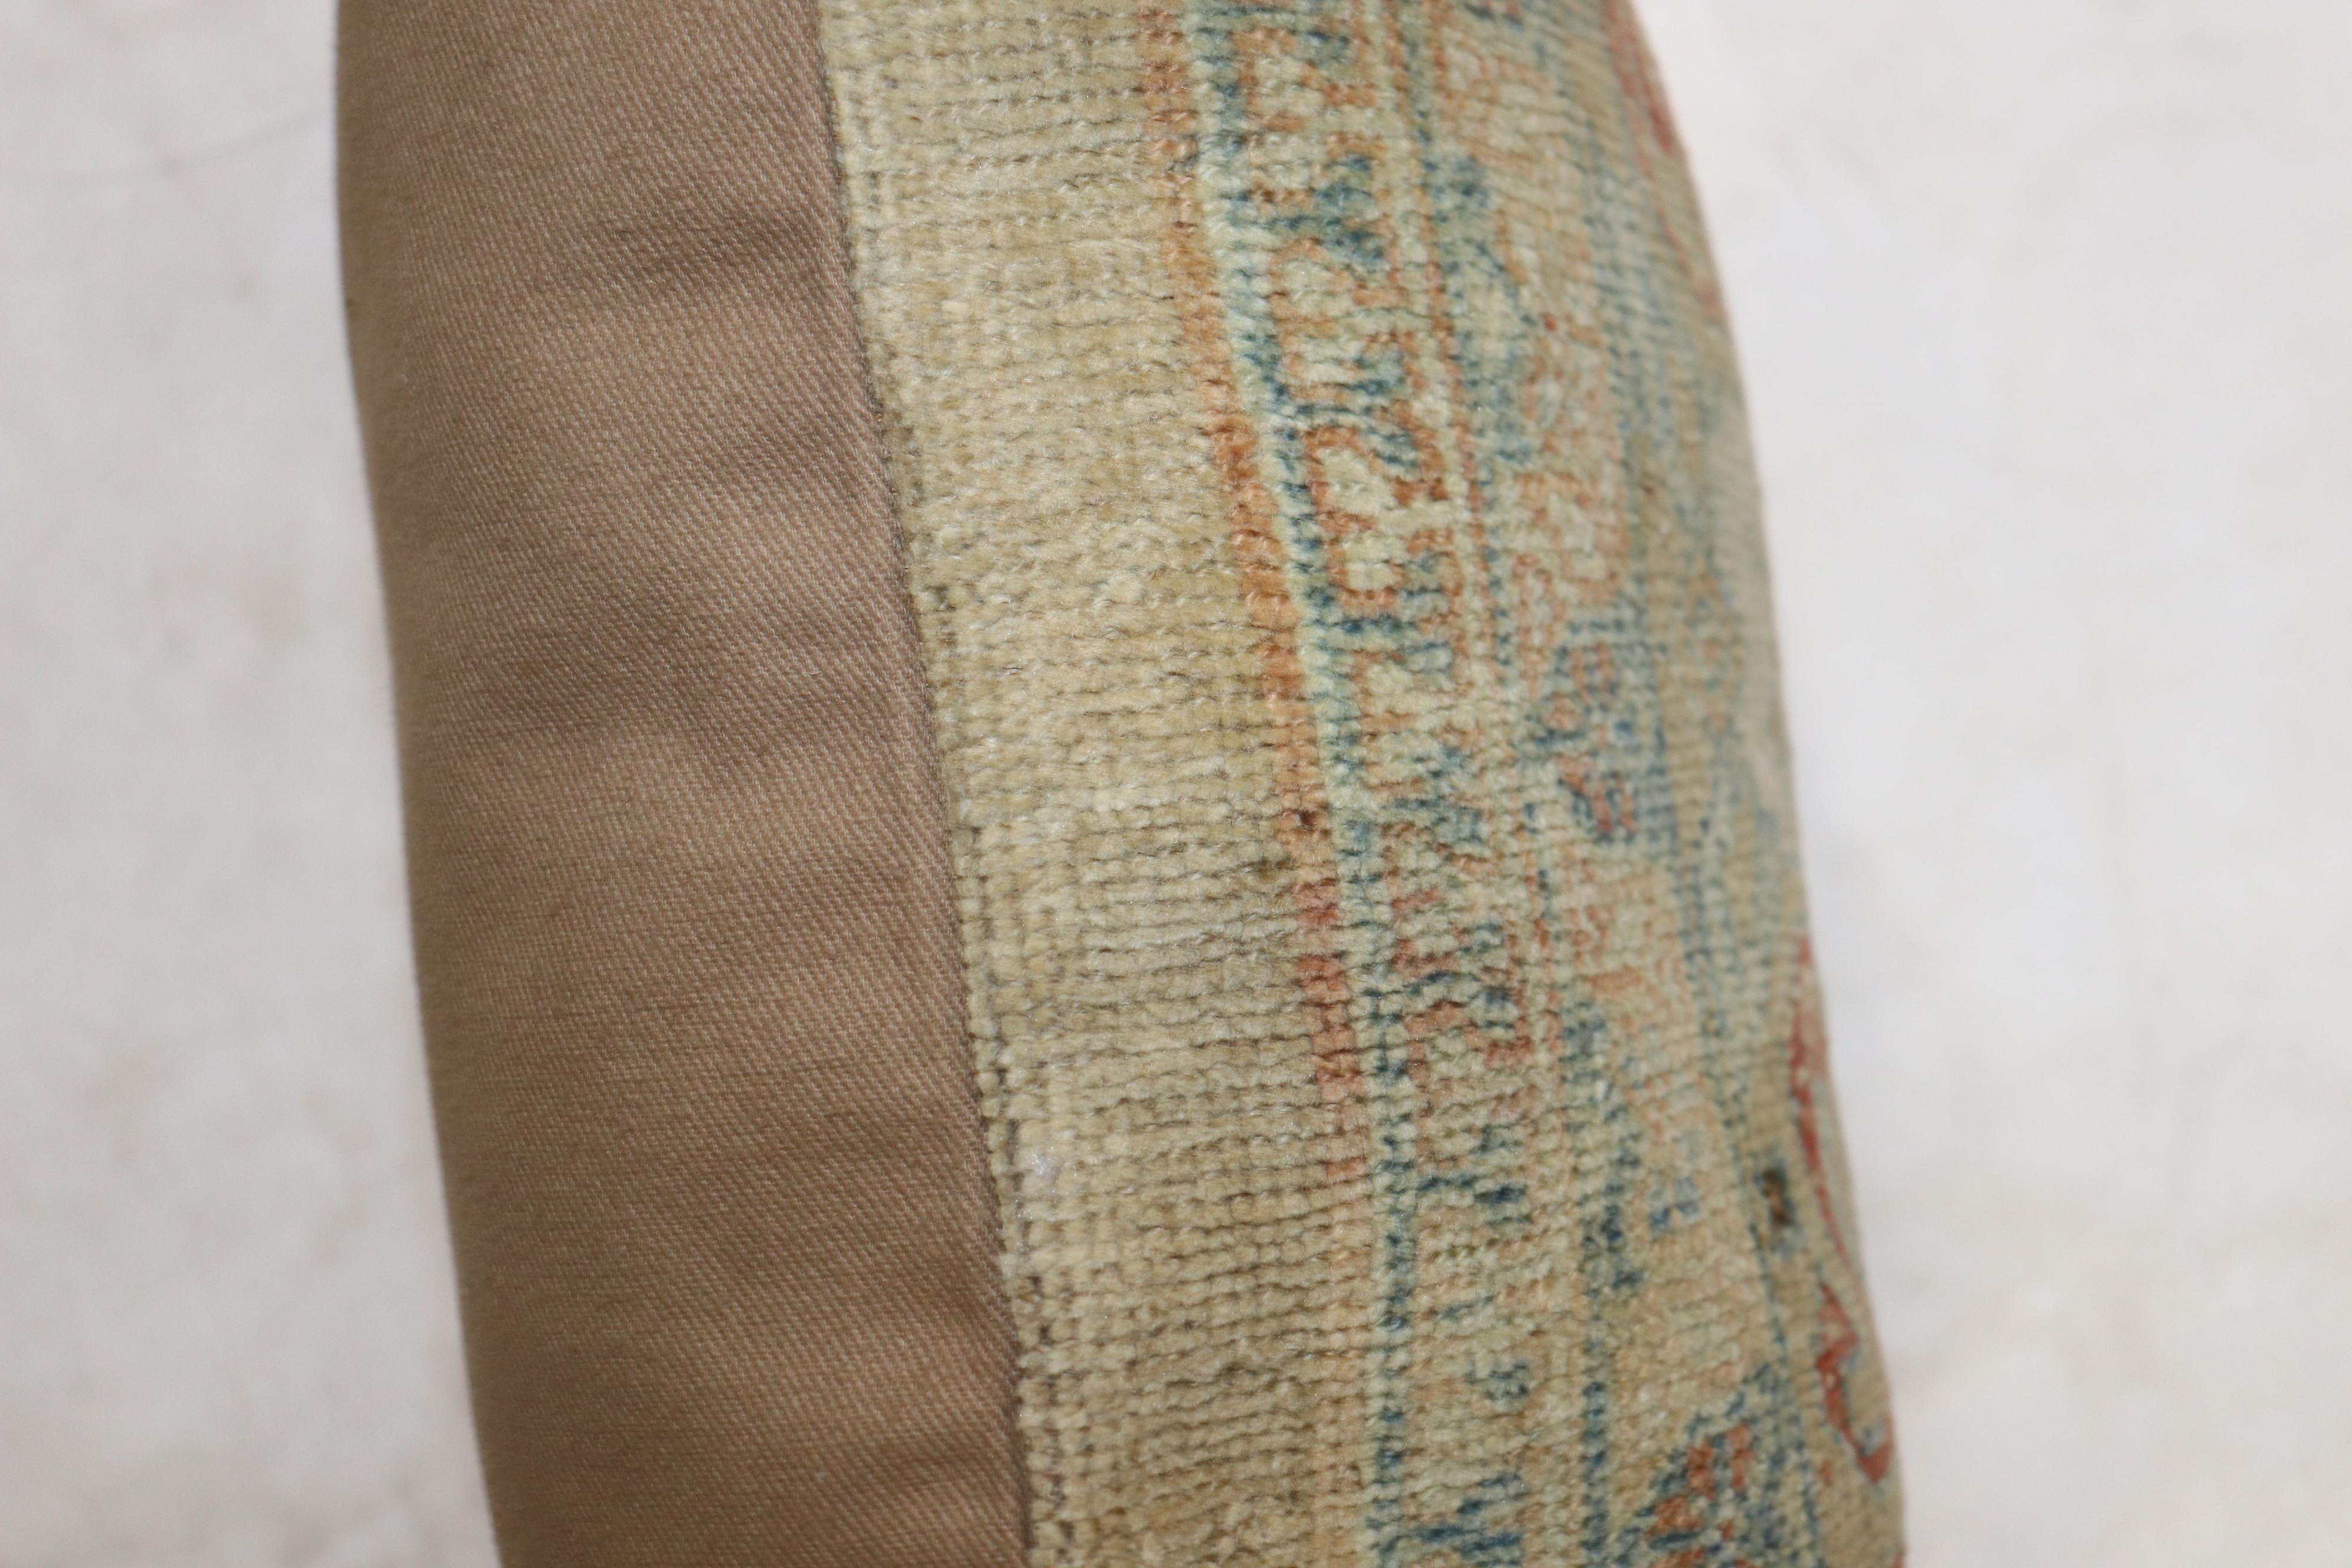 Larger lumbar size pillow made from a 20th century Persian Serab rug. Zipper close, poly-fill insert provided

Measures: 16” x 24”.